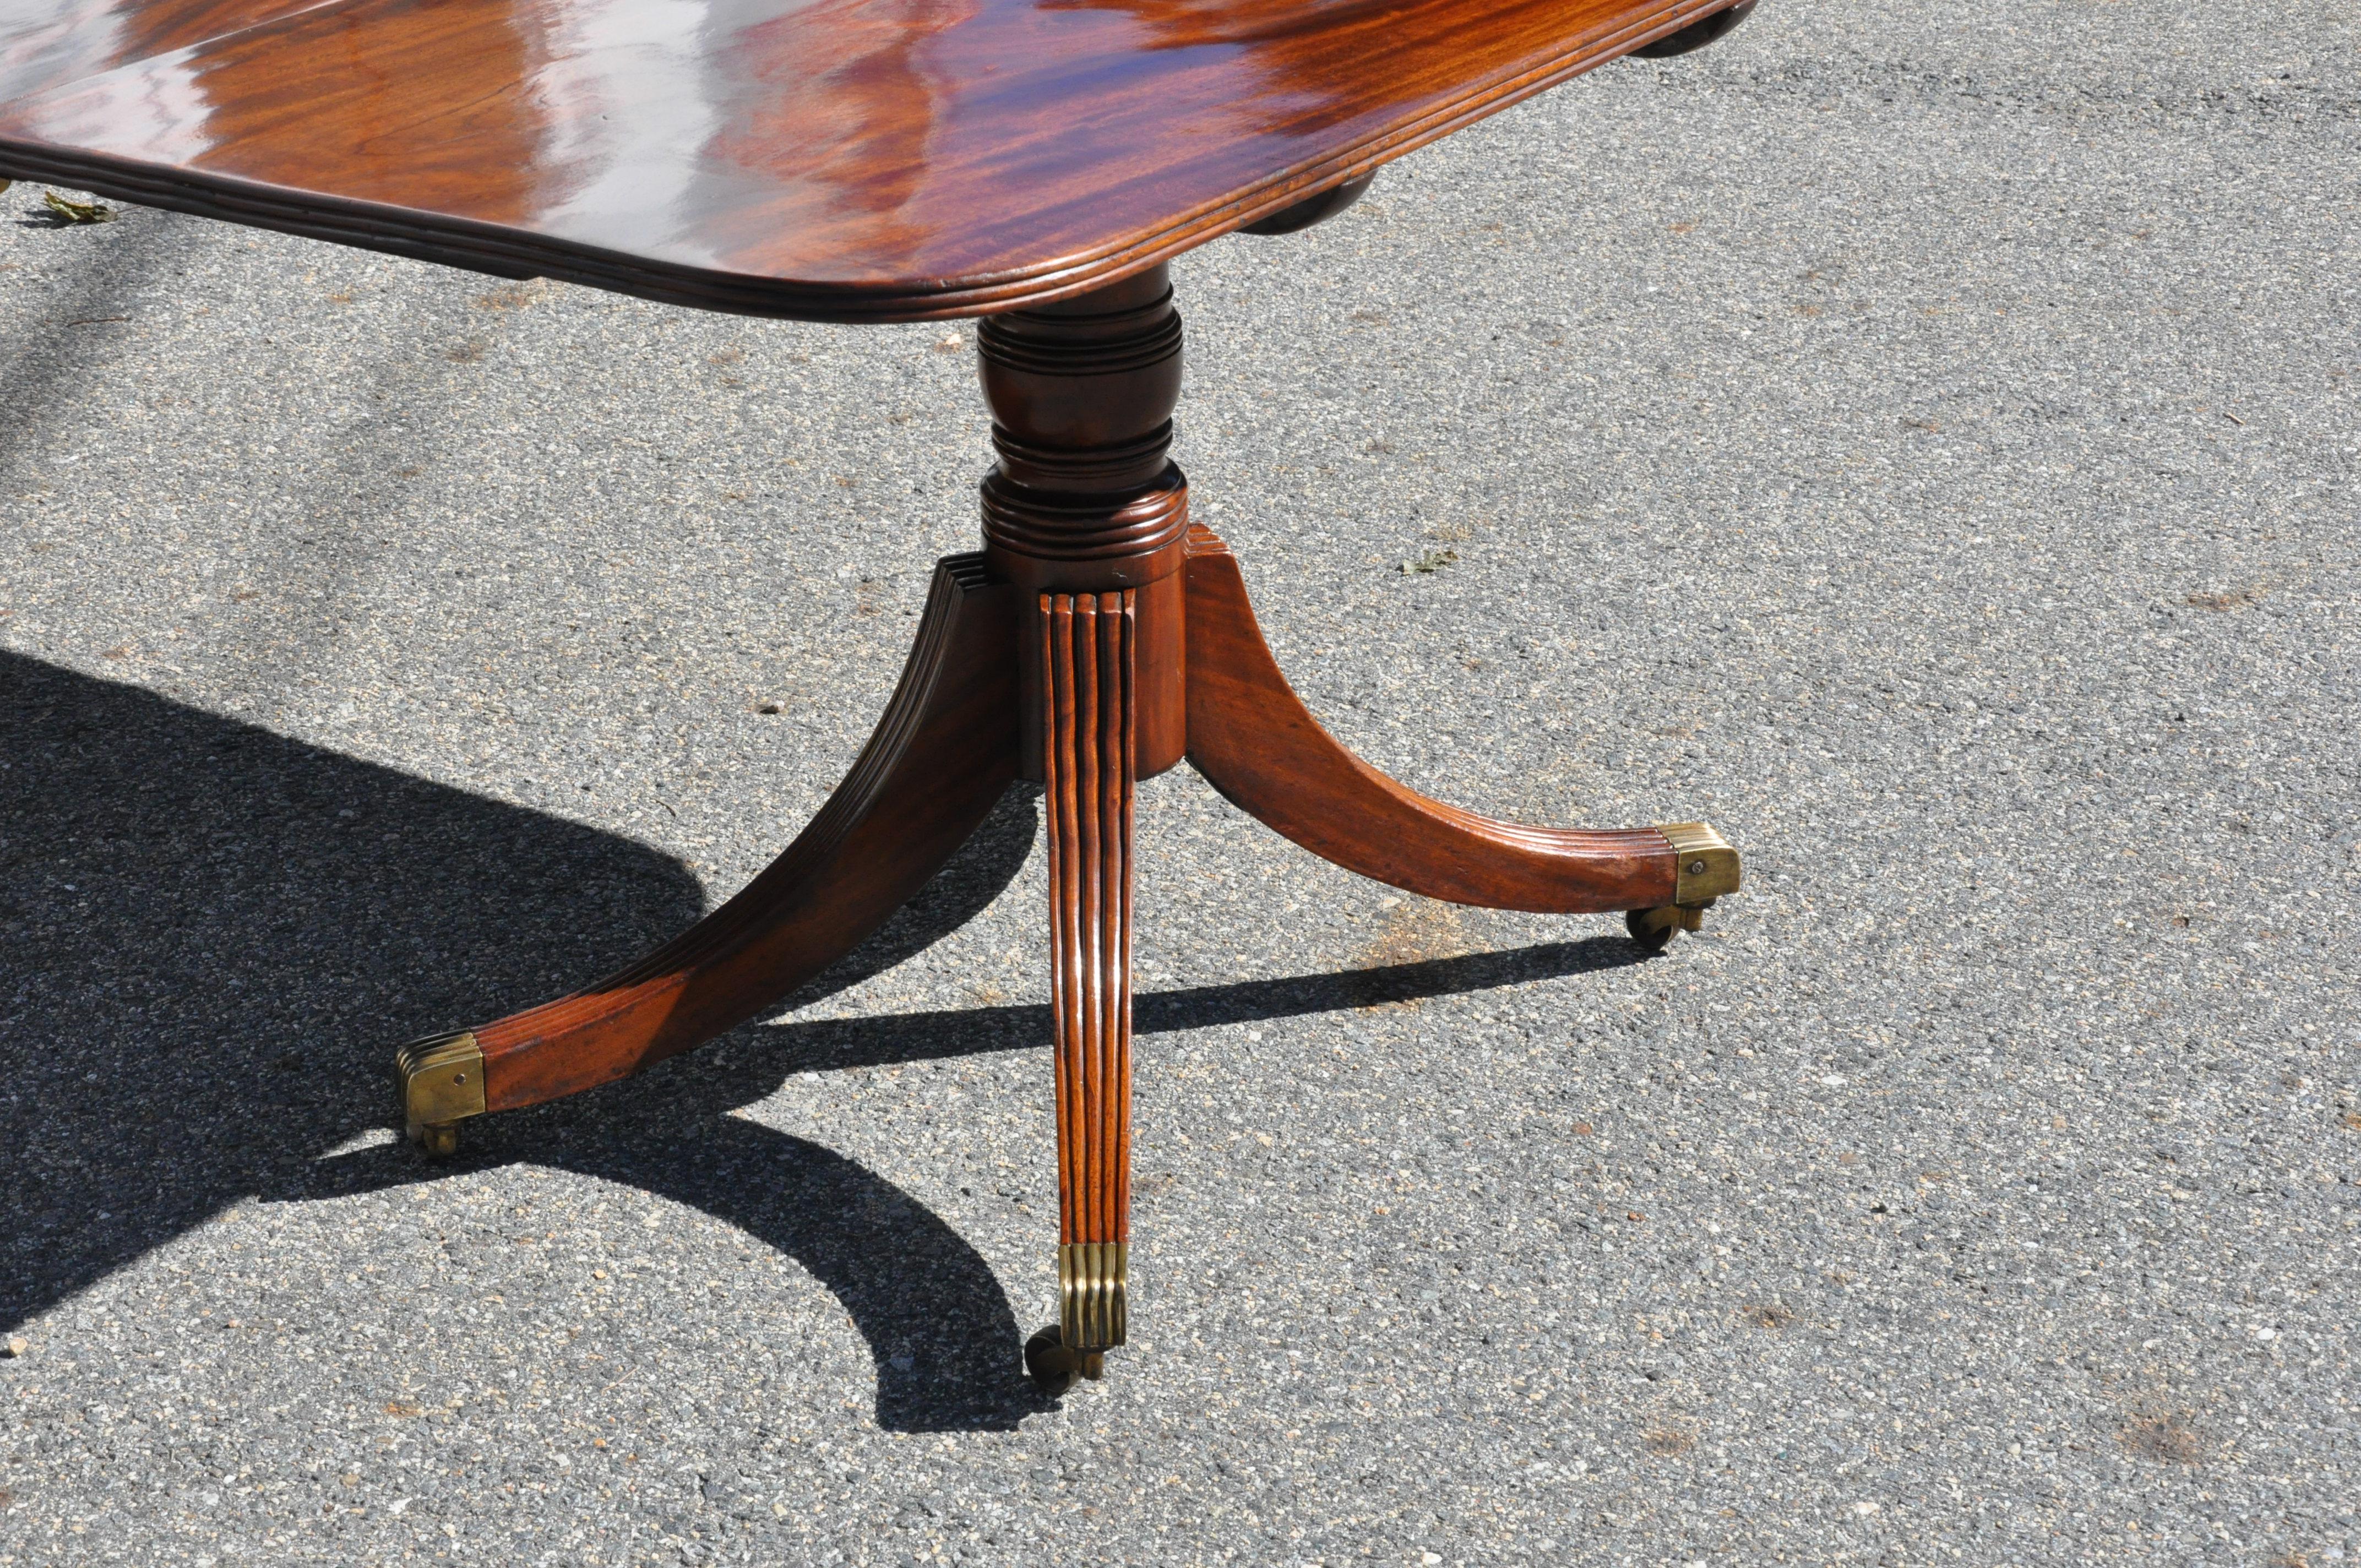 Mahogany Period Early 19th Century American Three Pedestal Dining Table